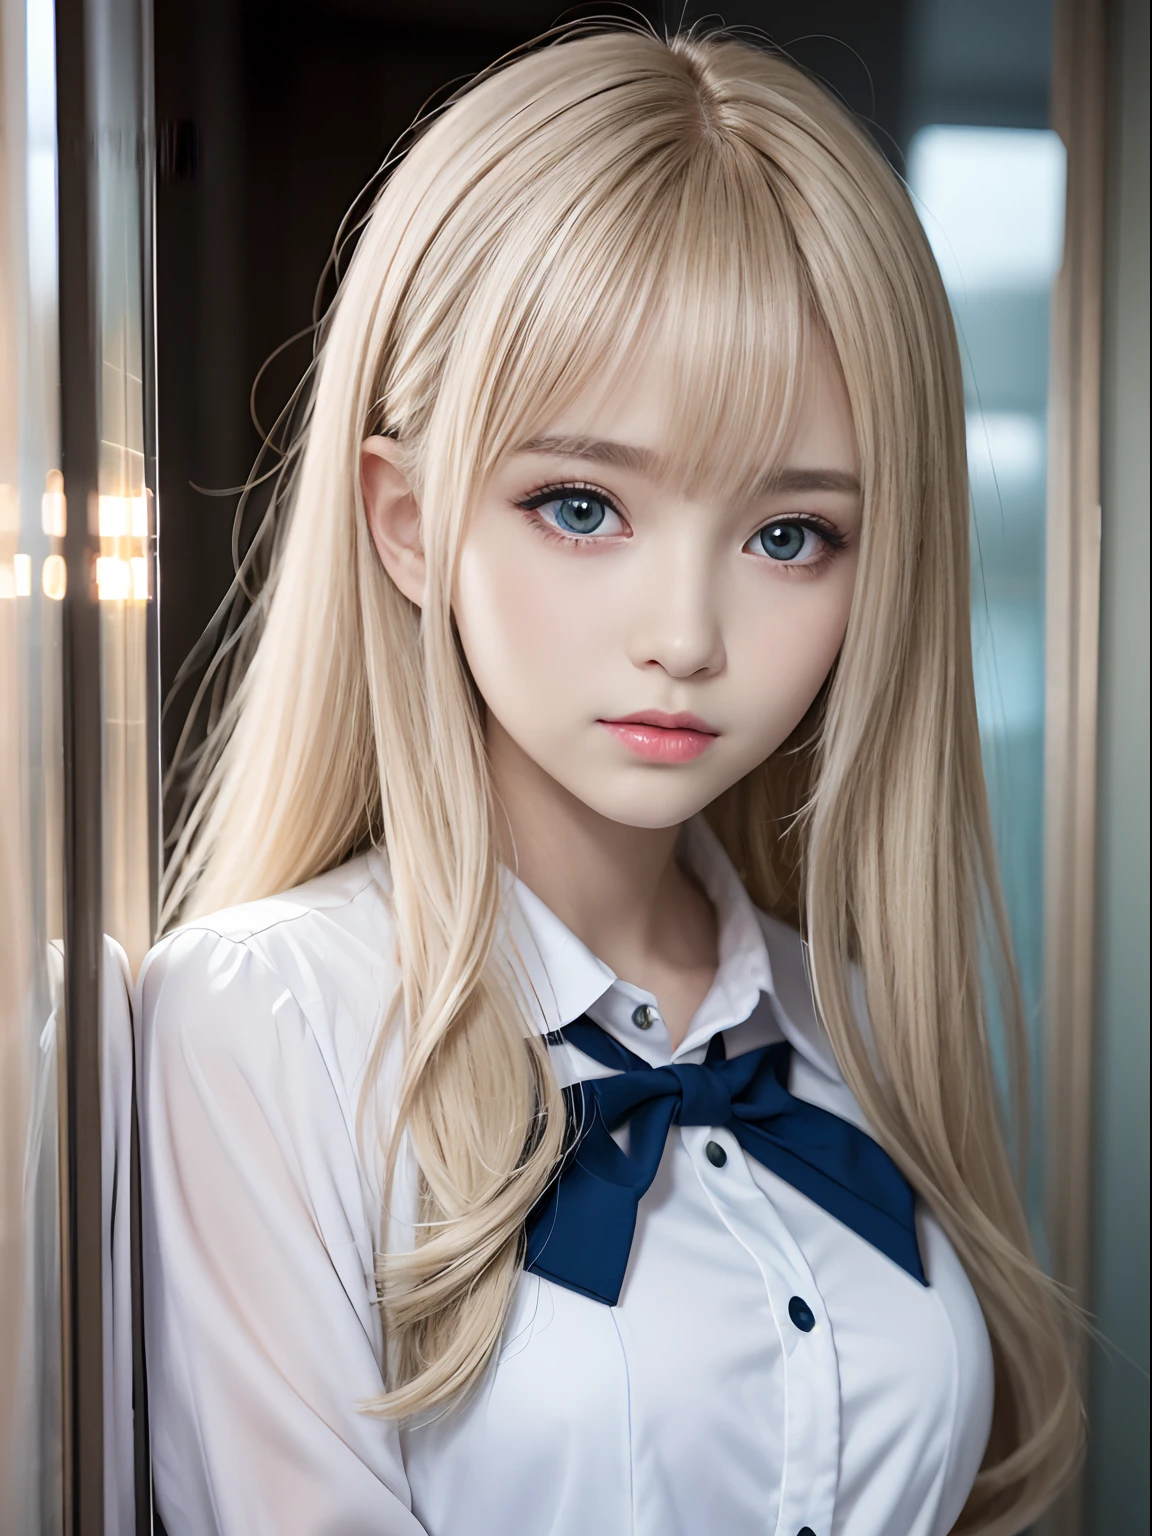 portlate、School Uniforms、bright expression、Young shiny shiny white shiny skin、Best Looks、Blonde reflected light、Platinum blonde hair with dazzling highlights、shiny light hair,、Super long silky straight hair、Beautiful bangs that shine、Glowing crystal clear attractive big blue eyes、Very beautiful nice cute 16 year old girl、Lush bust、